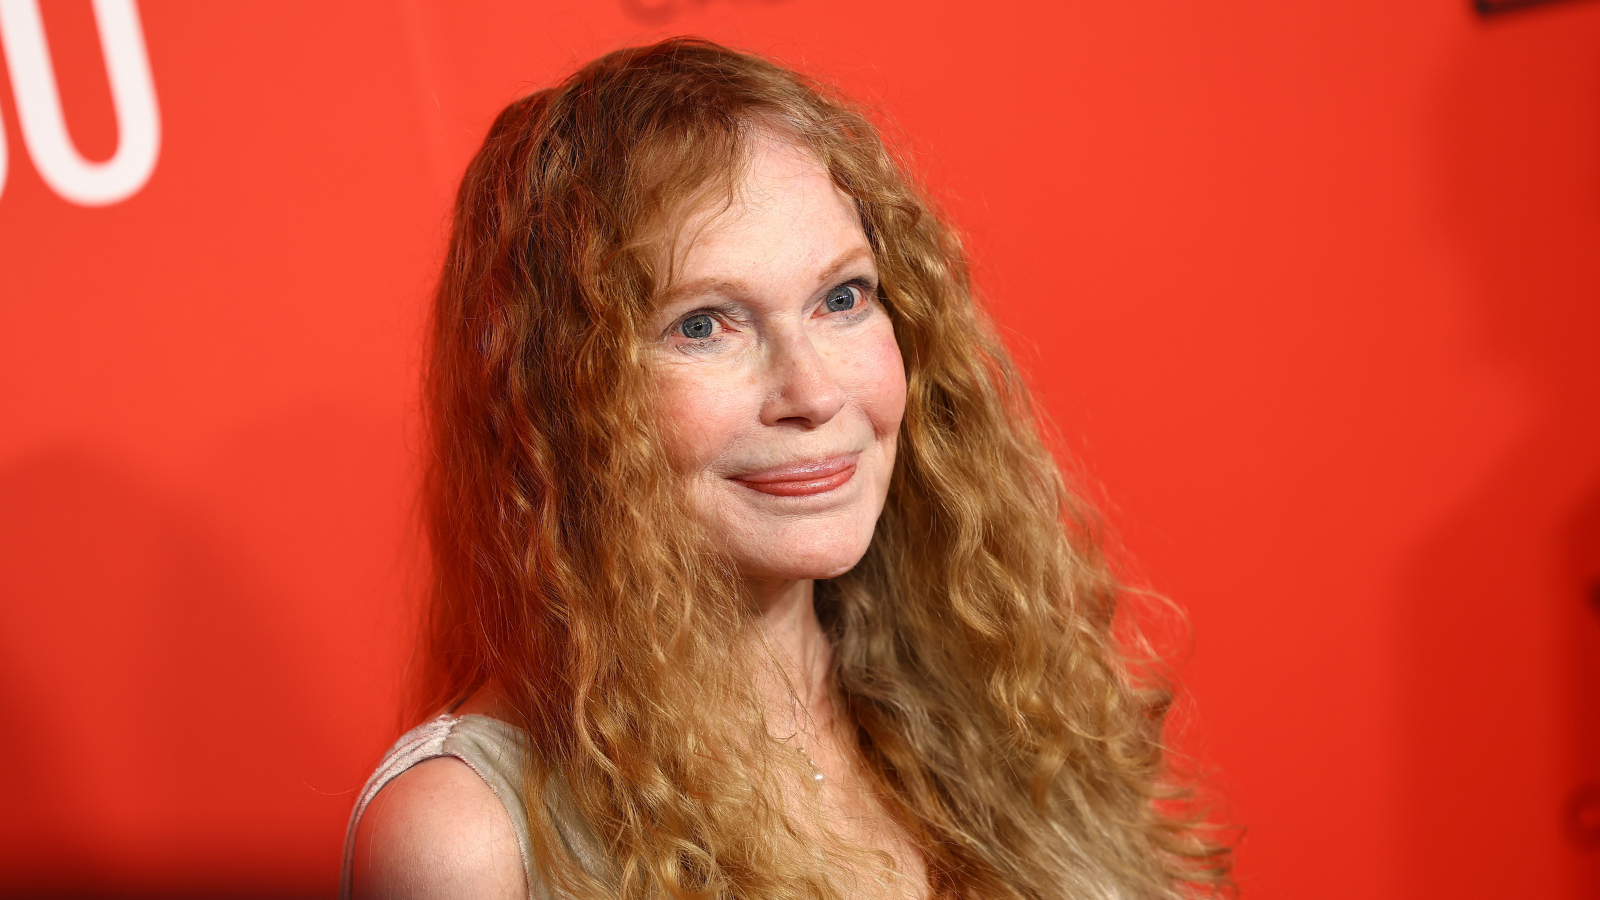 Real estate experts say Mia Farrow's house exterior paint has a 'sheer uniqueness' that's worth the risk